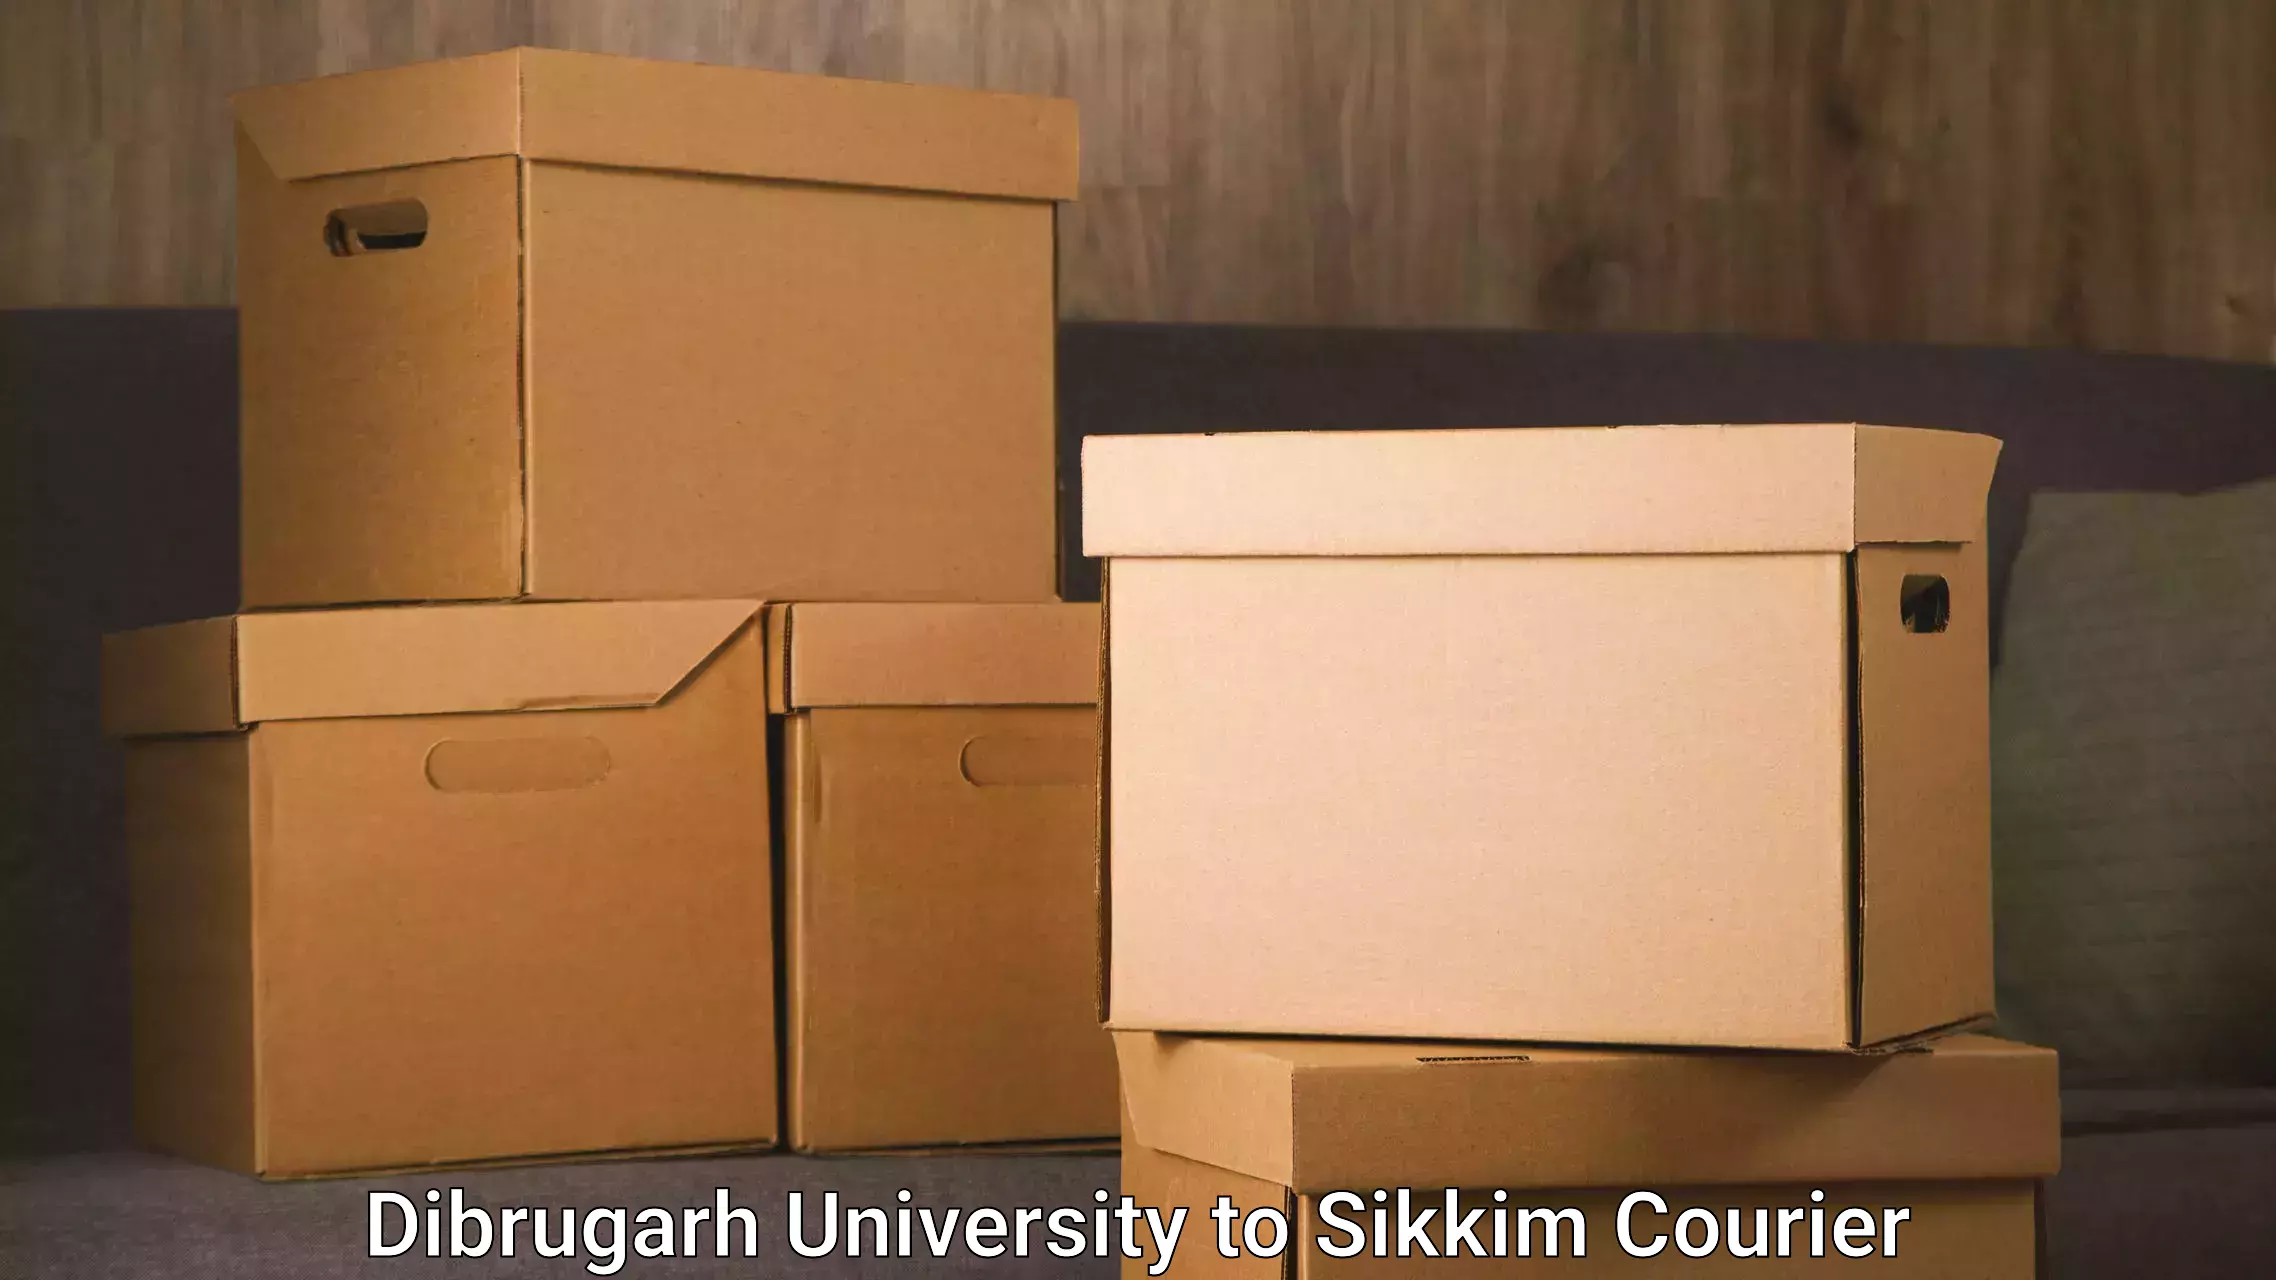 Overnight delivery services Dibrugarh University to Pelling